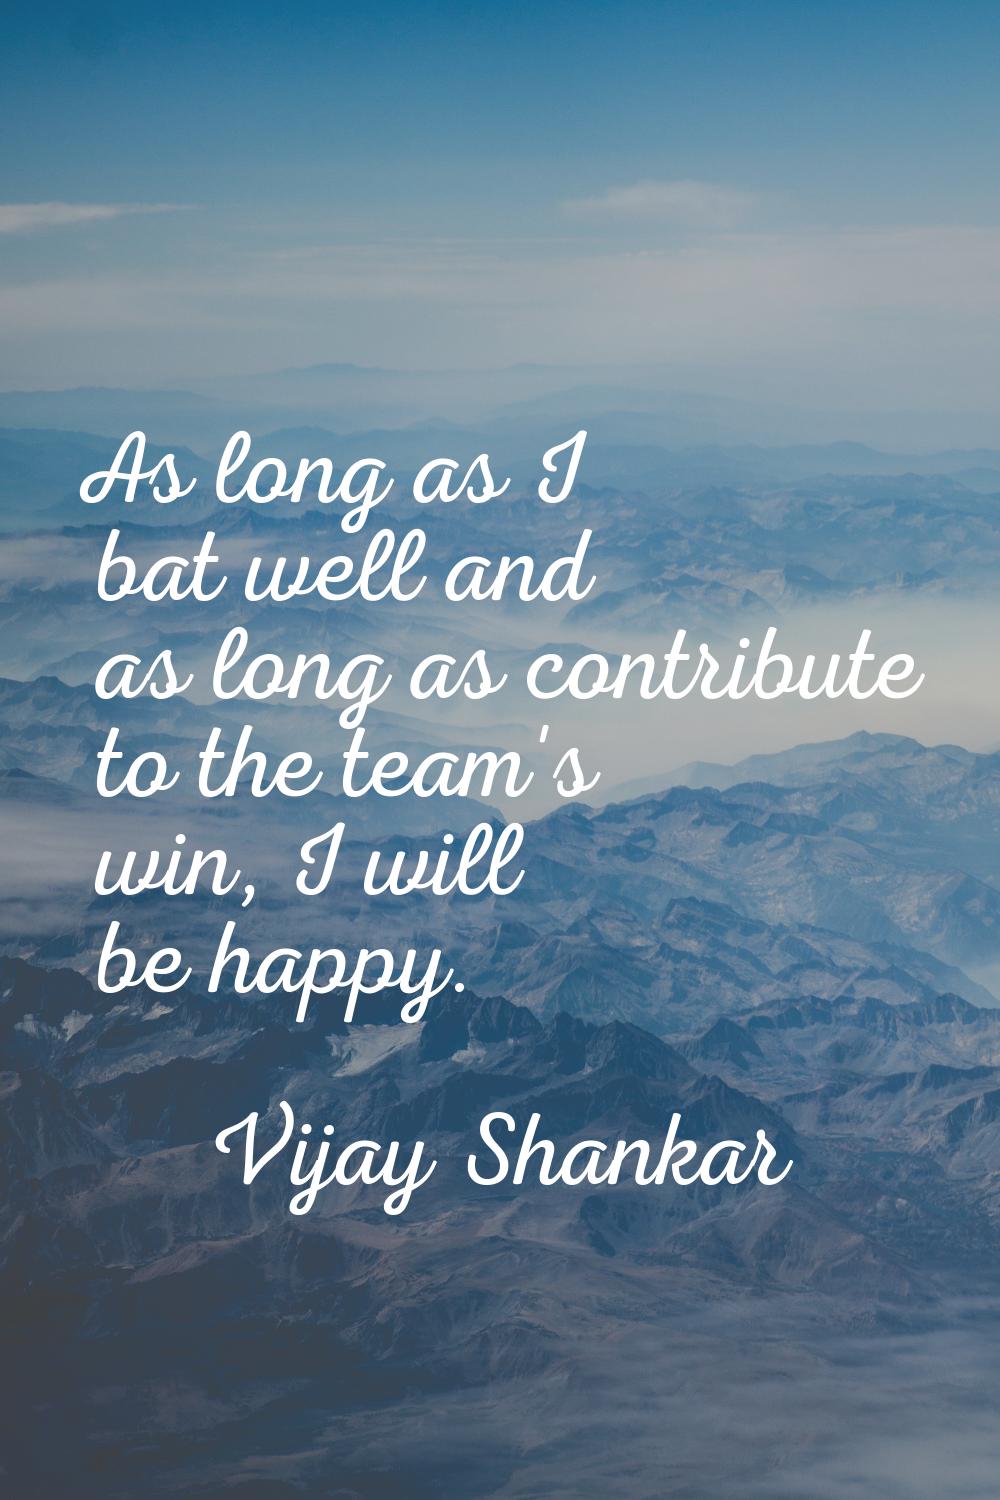 As long as I bat well and as long as contribute to the team's win, I will be happy.